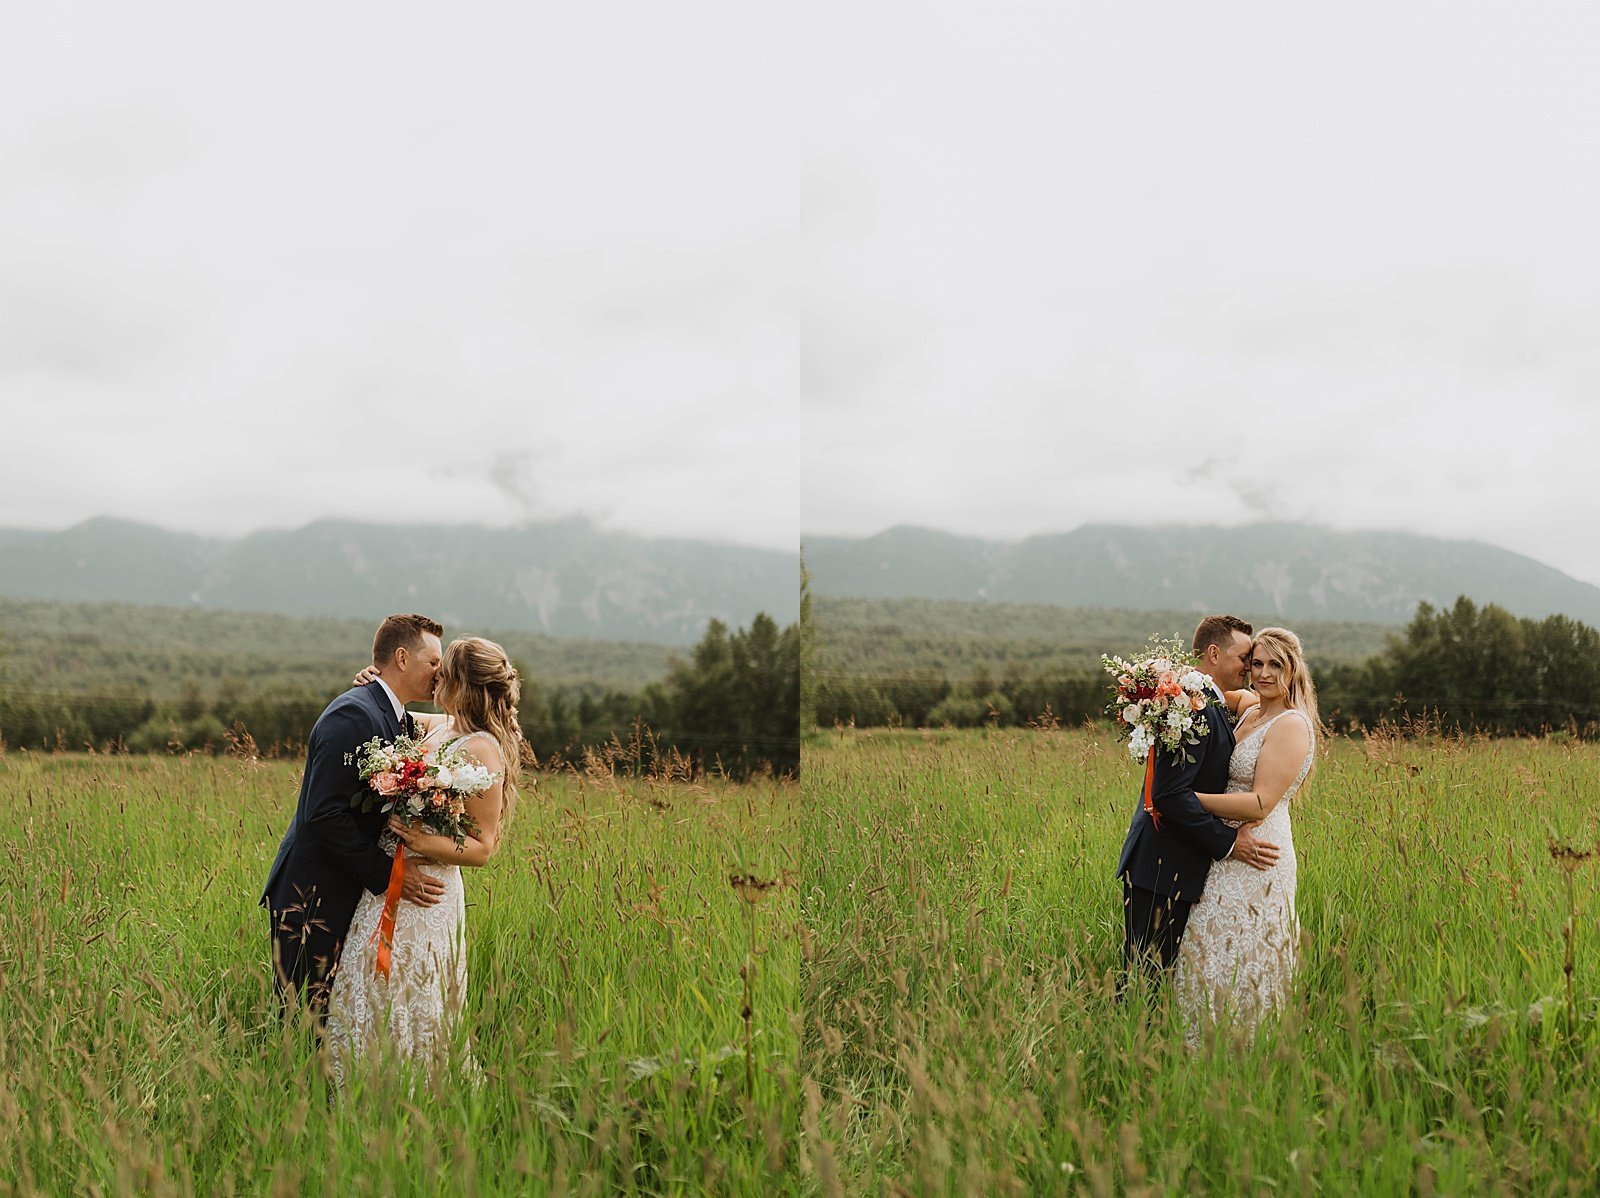  Bride and groom laughing and kissing in a field after their private 10 year vow renewal.  